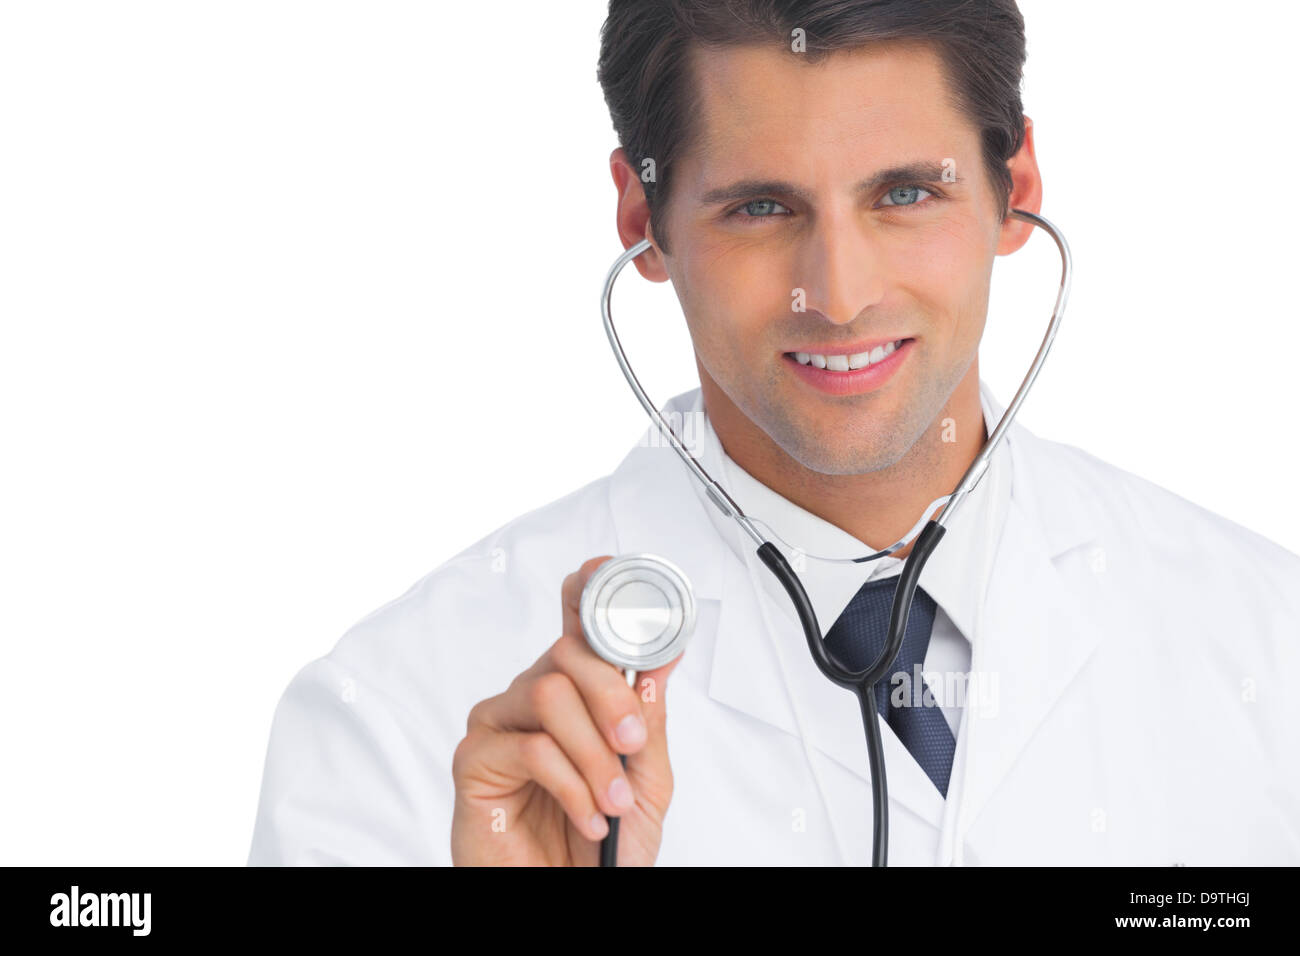 Doctor smiling and holding up stethoscope Banque D'Images